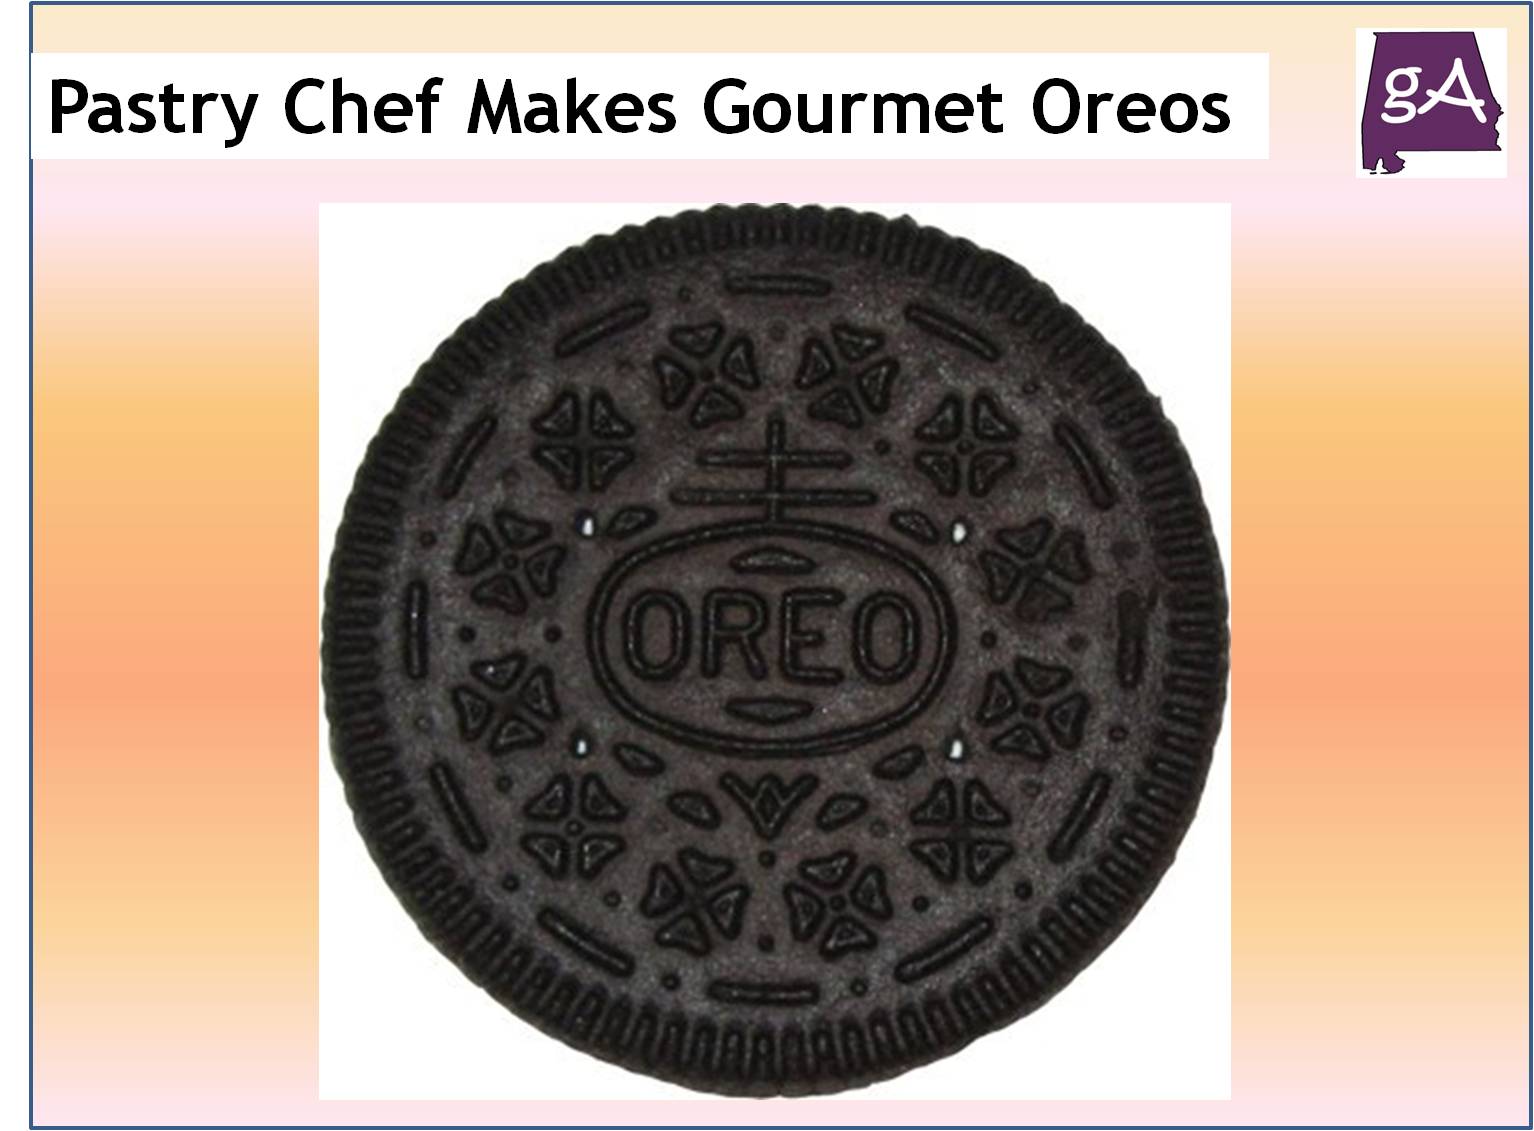 Watch Pastry Chef Attempts to Make Gourmet M&M's, Gourmet Makes